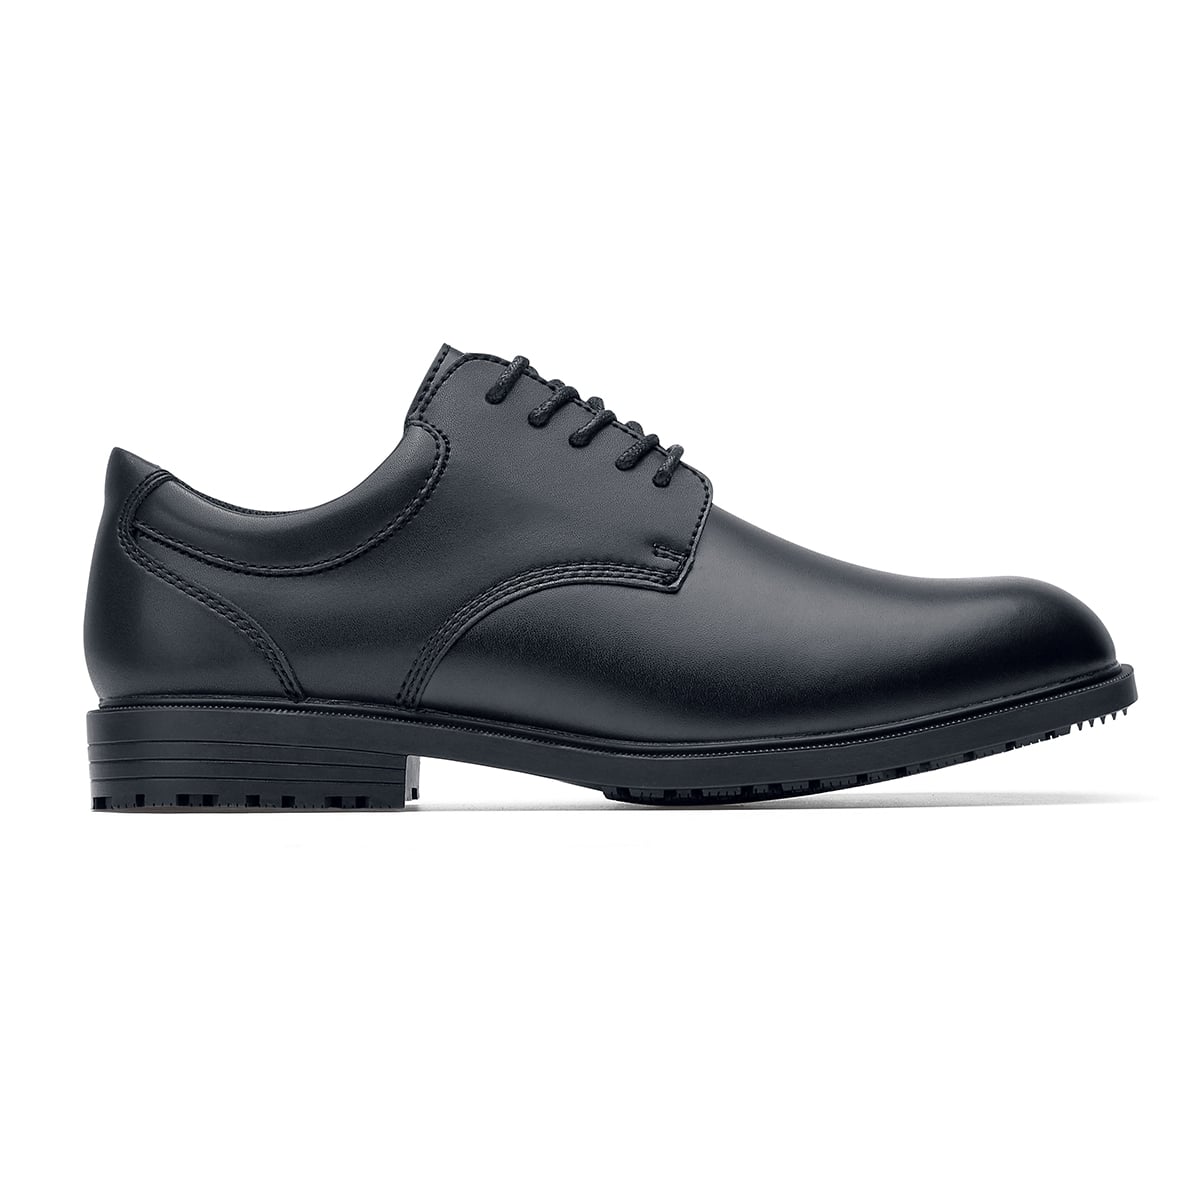 The Shoes for Crews Cambridge III is a slip-resistant leather dress shoe, with removable cushioned insoles and a padded comfort collar, seen from the right.